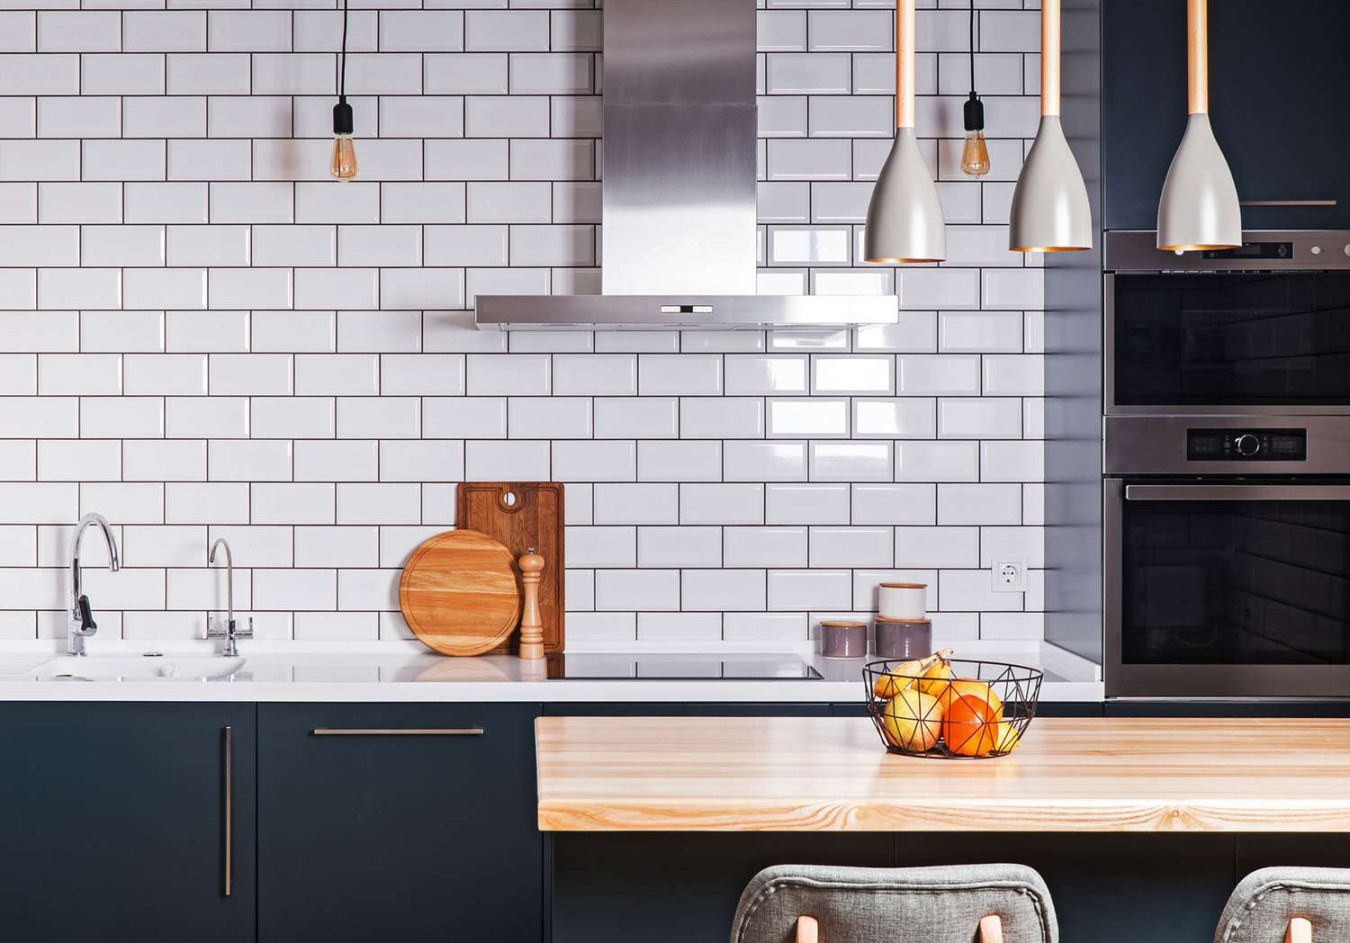 Kitchen Tile Backsplash Ideas You Need to See Right Now